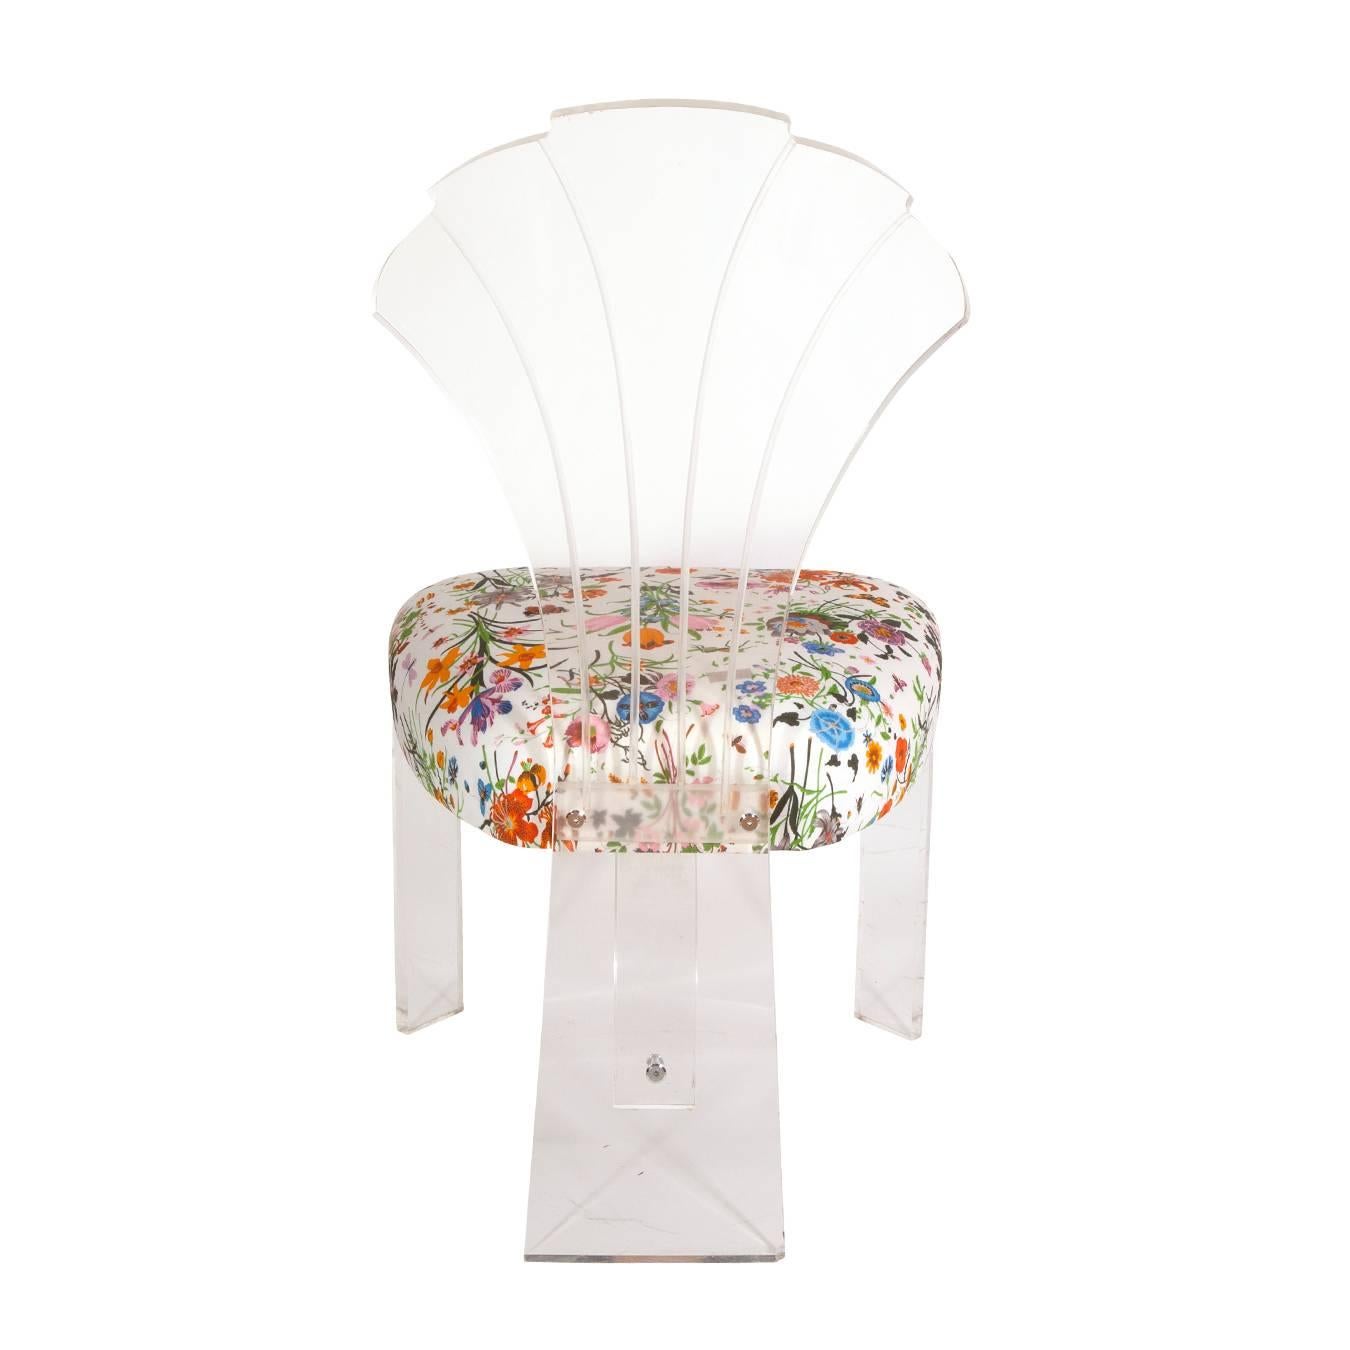 Shellback Lucite chair in Gucci floral fabric.